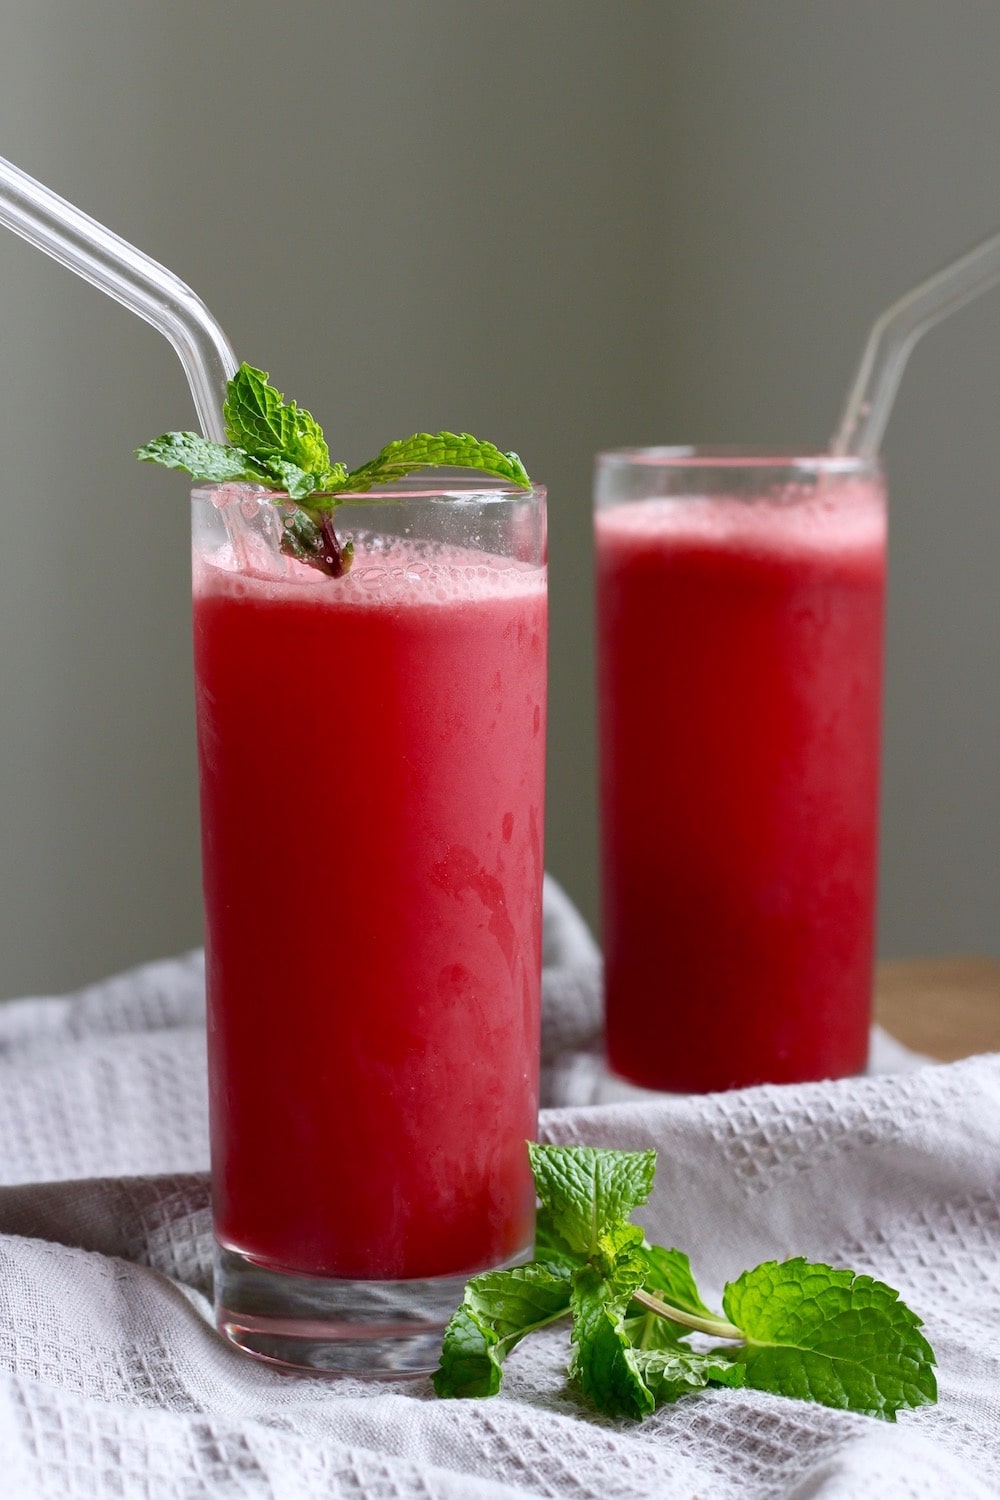 Watermelon Mint Juice Made in a Blender